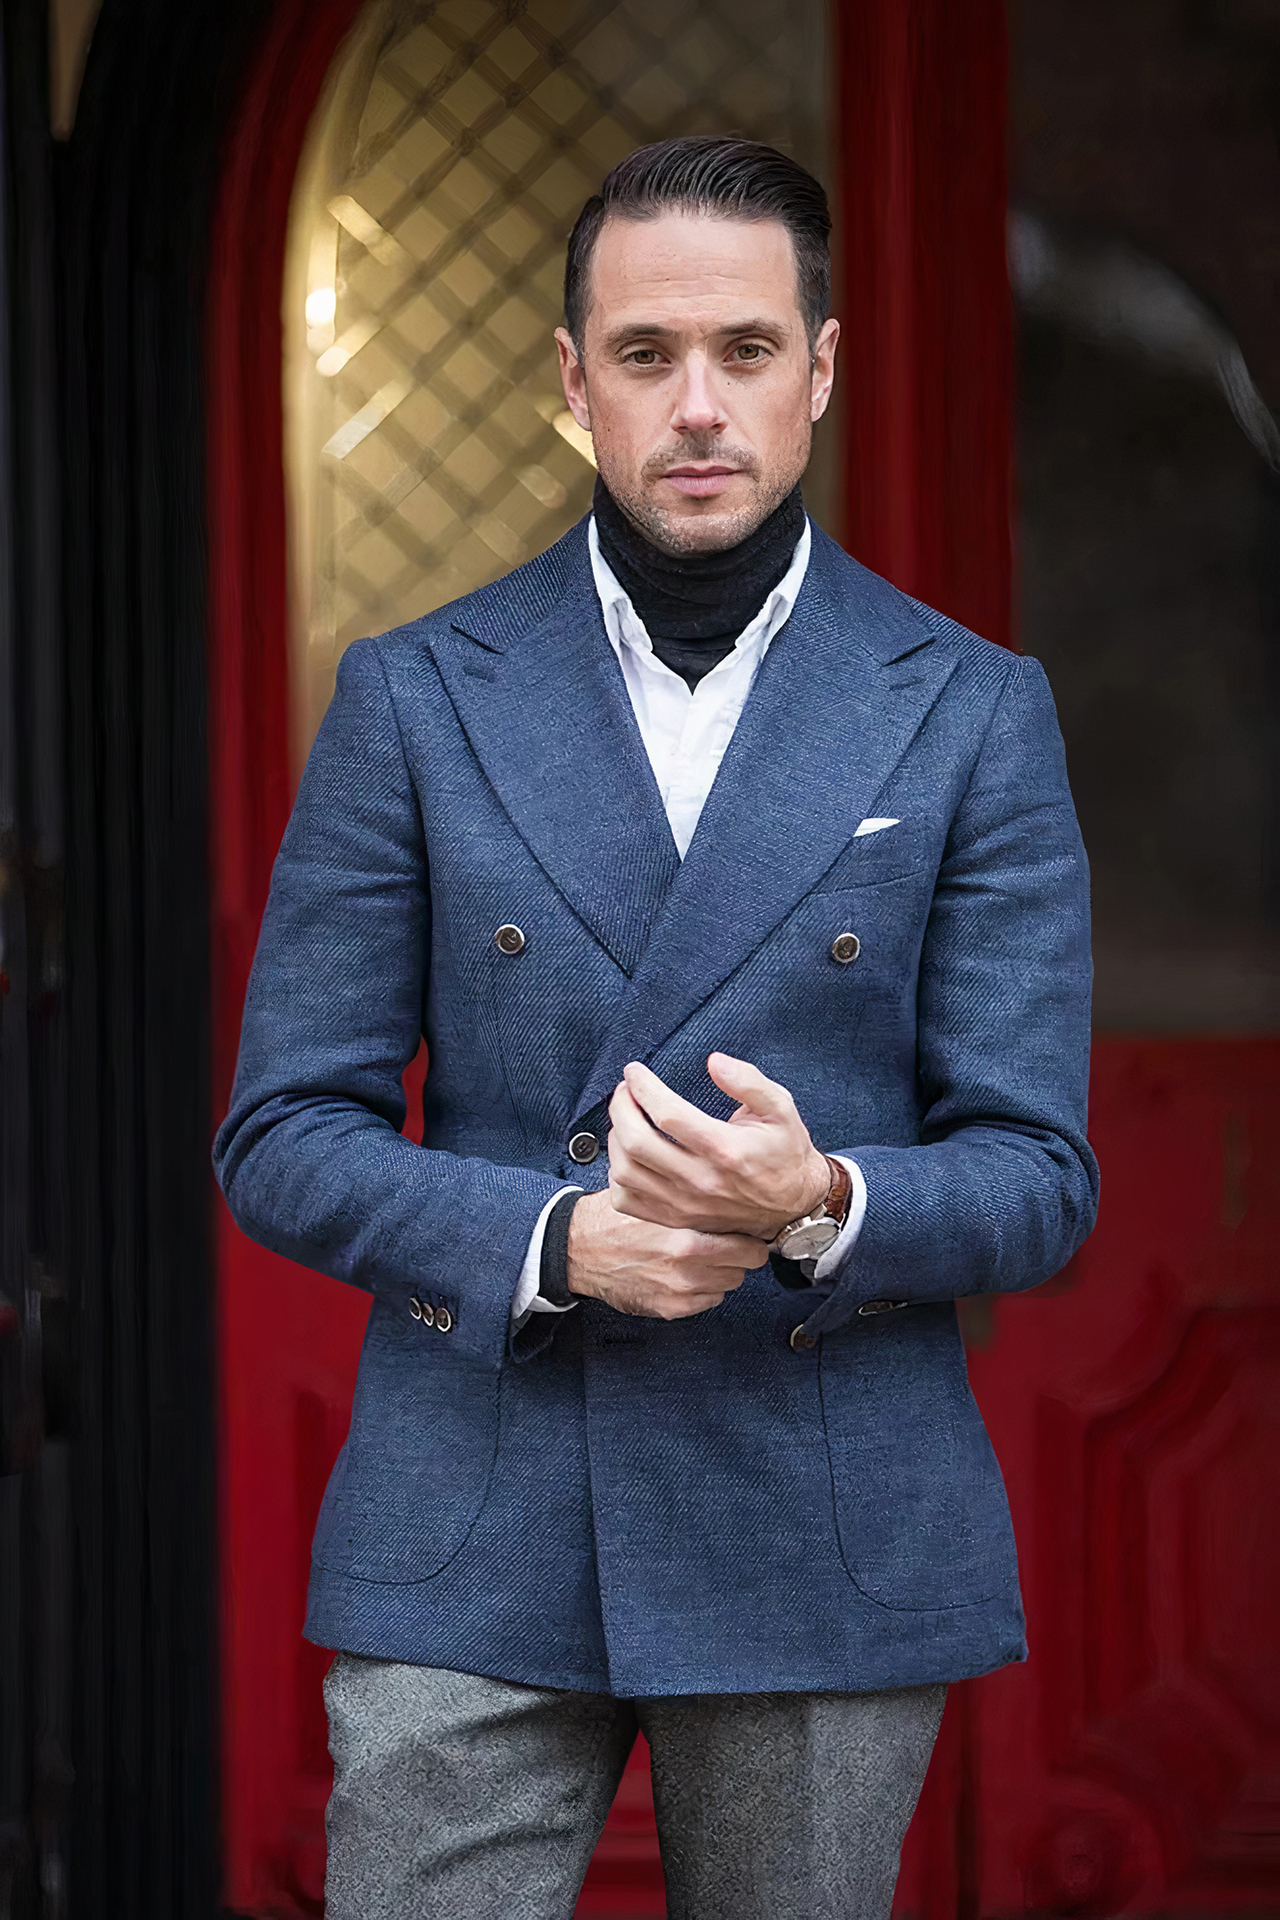 Navy blue double-breasted blazer, white shirt, and black turtleneck